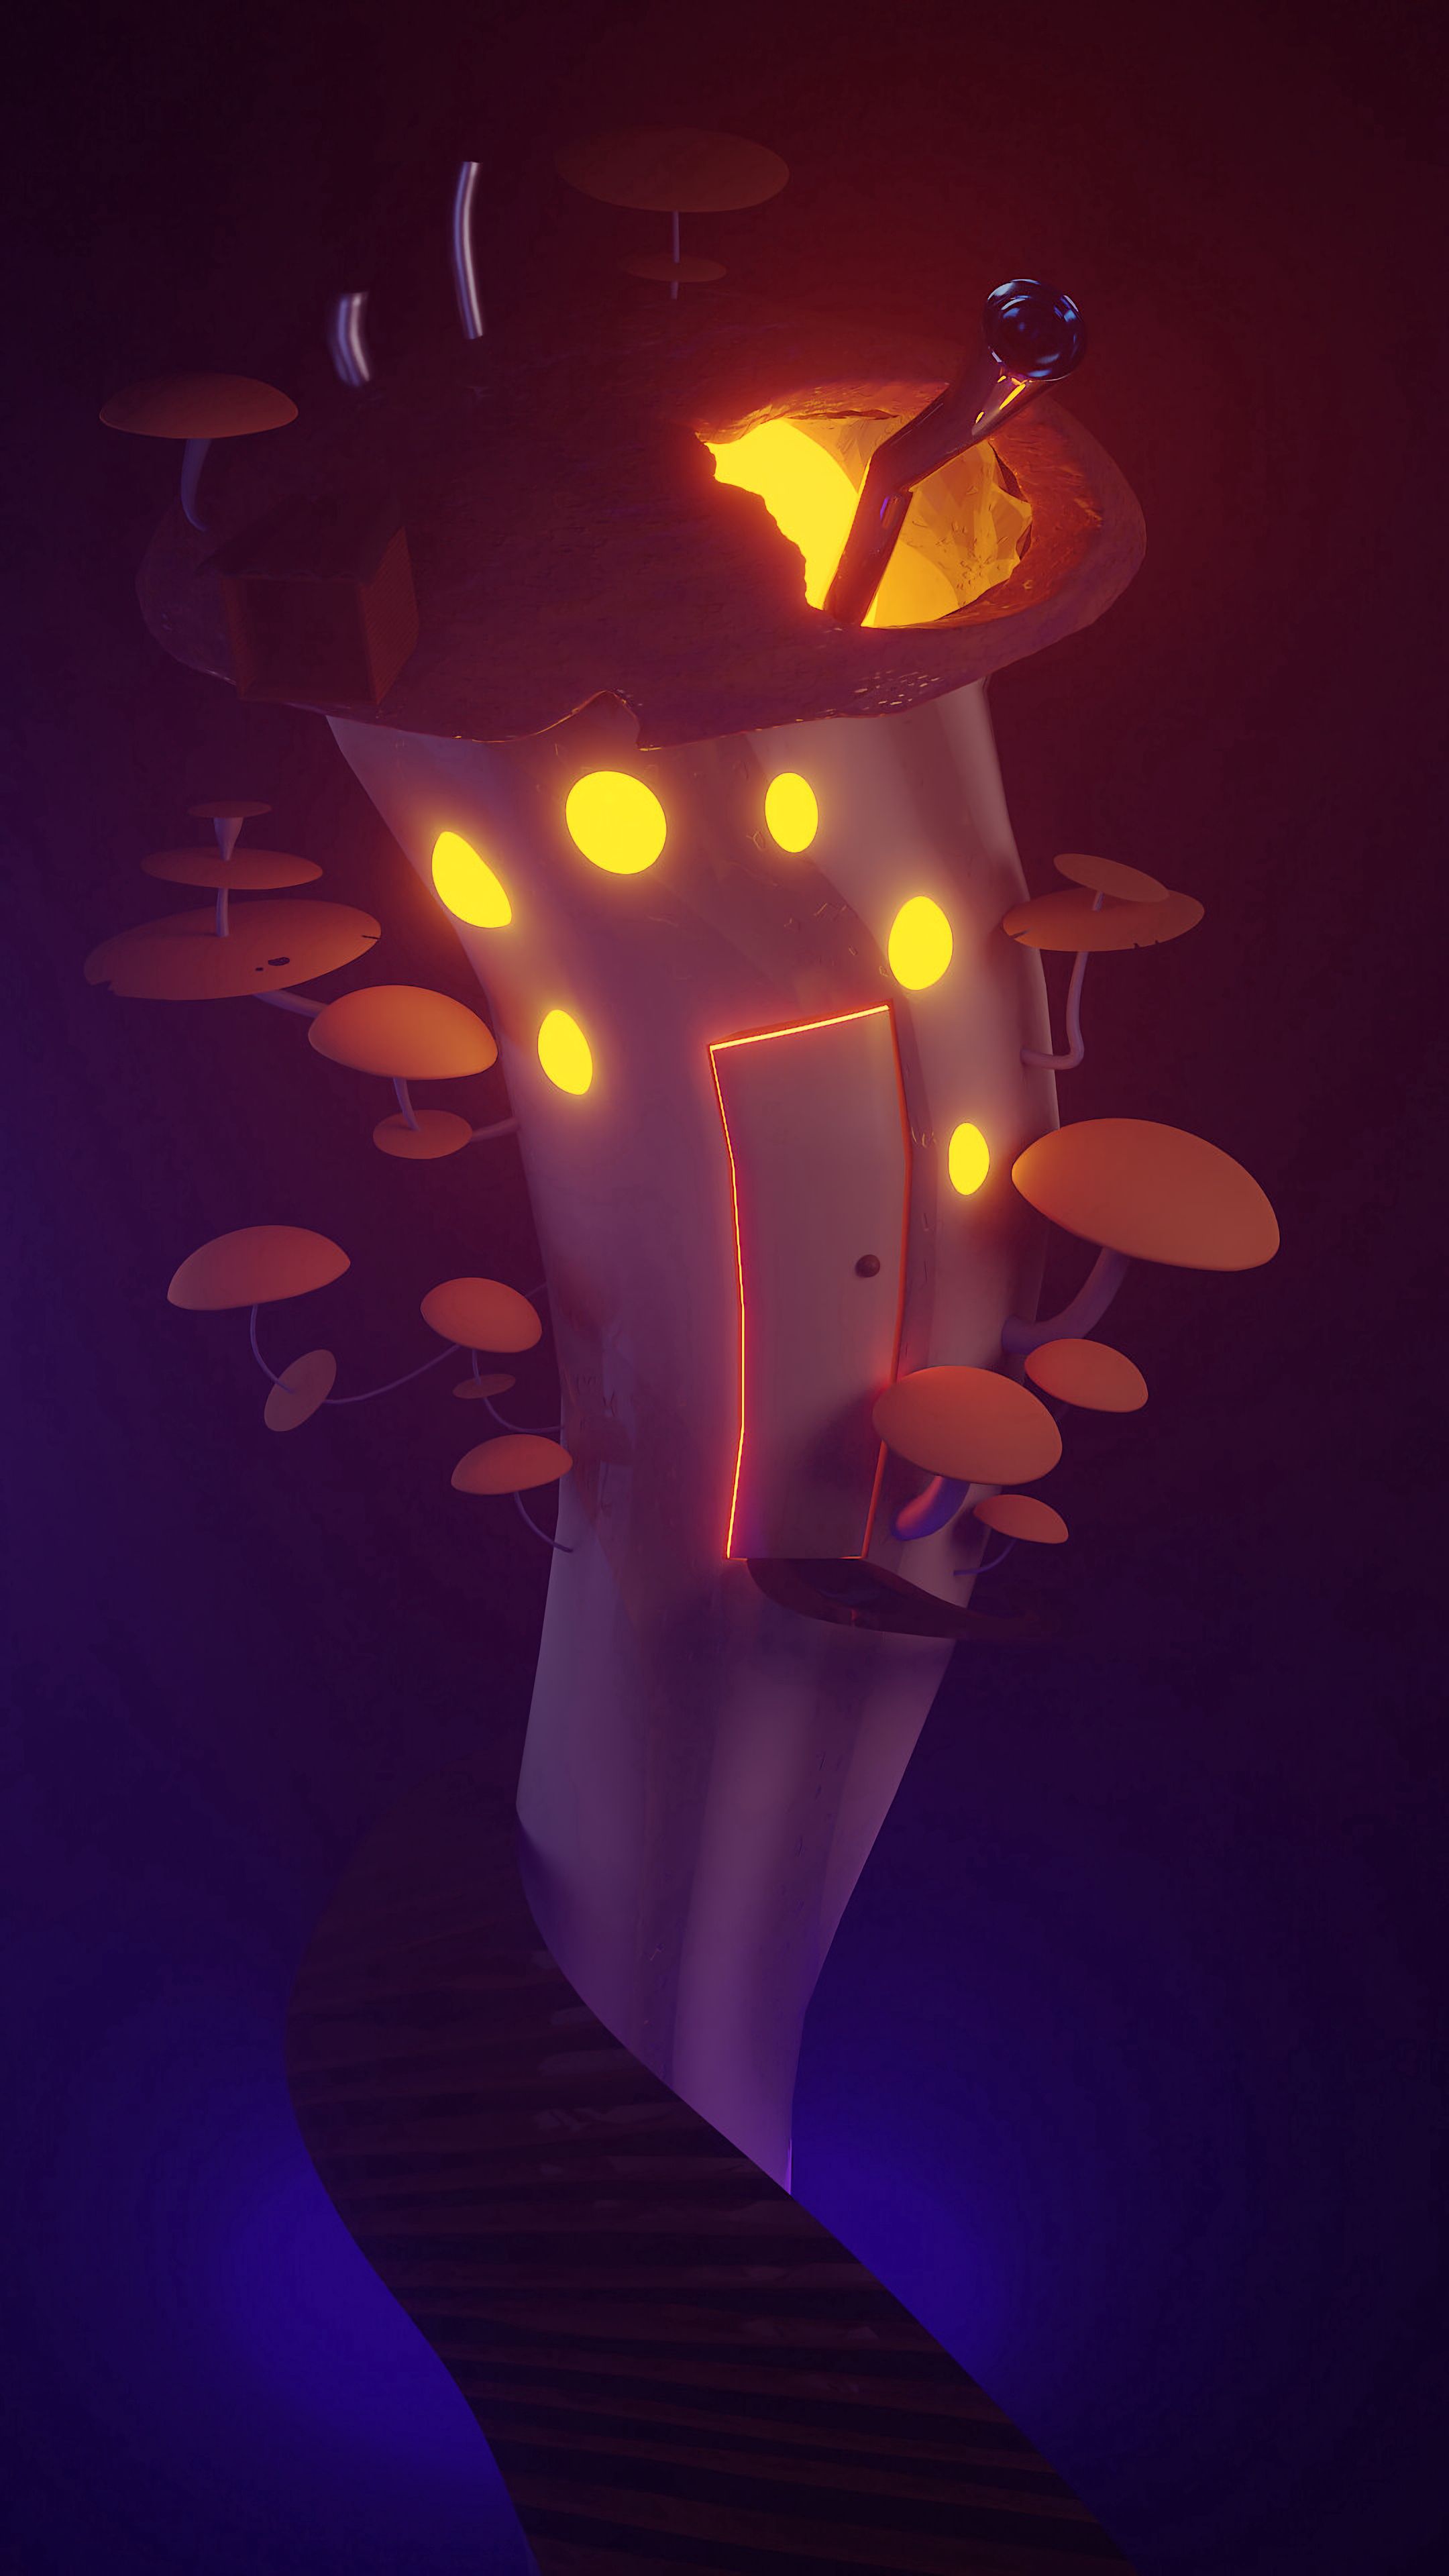 android mushroom, 3d, art, small house, lodge, glow